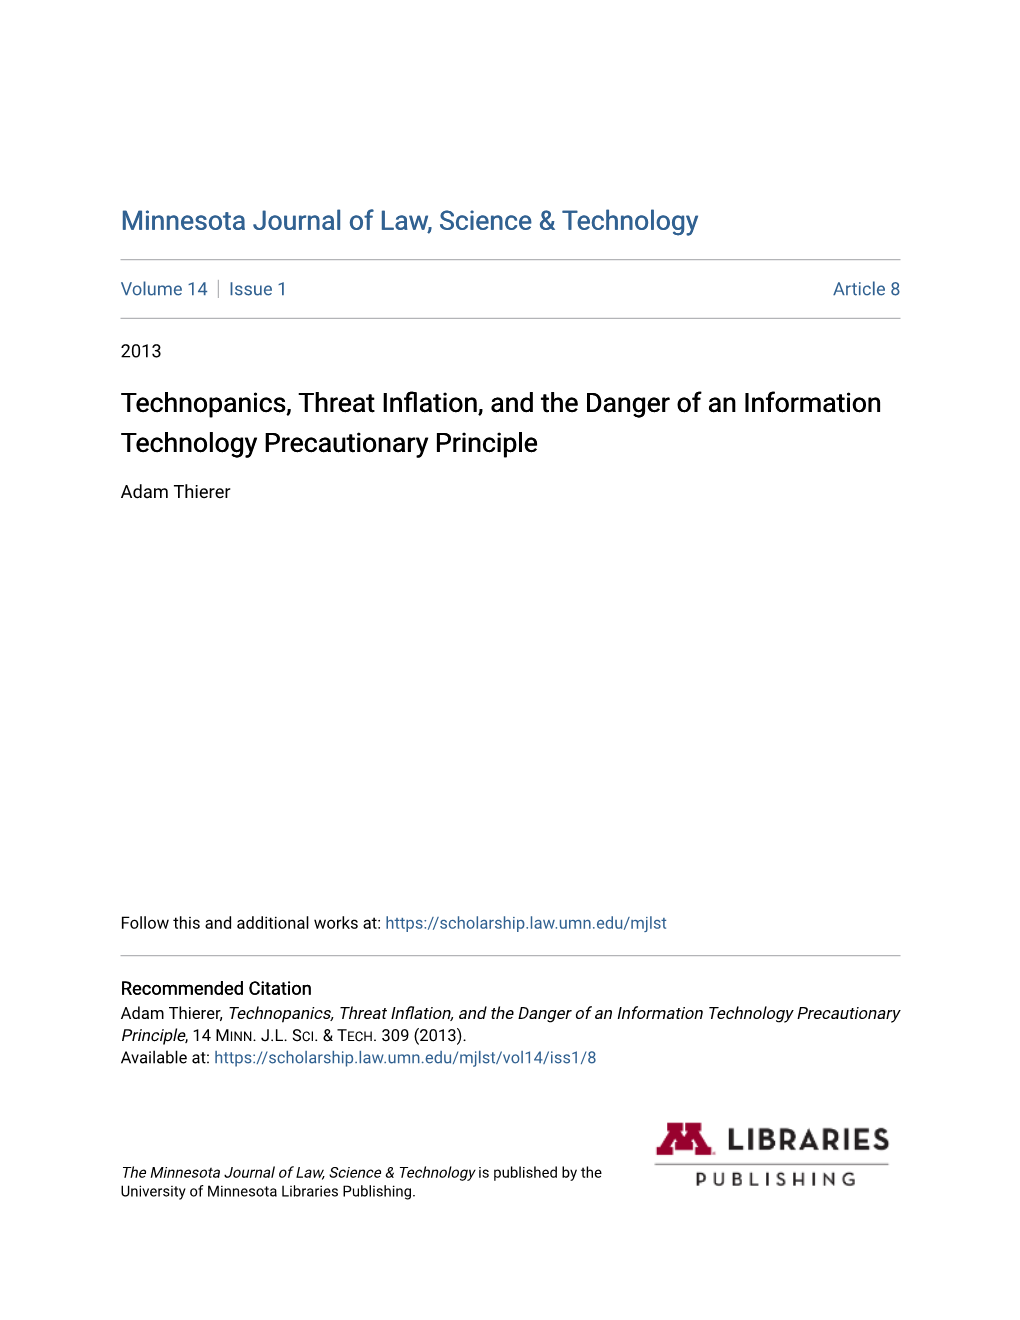 Technopanics, Threat Inflation, and the Danger of an Information Technology Precautionary Principle